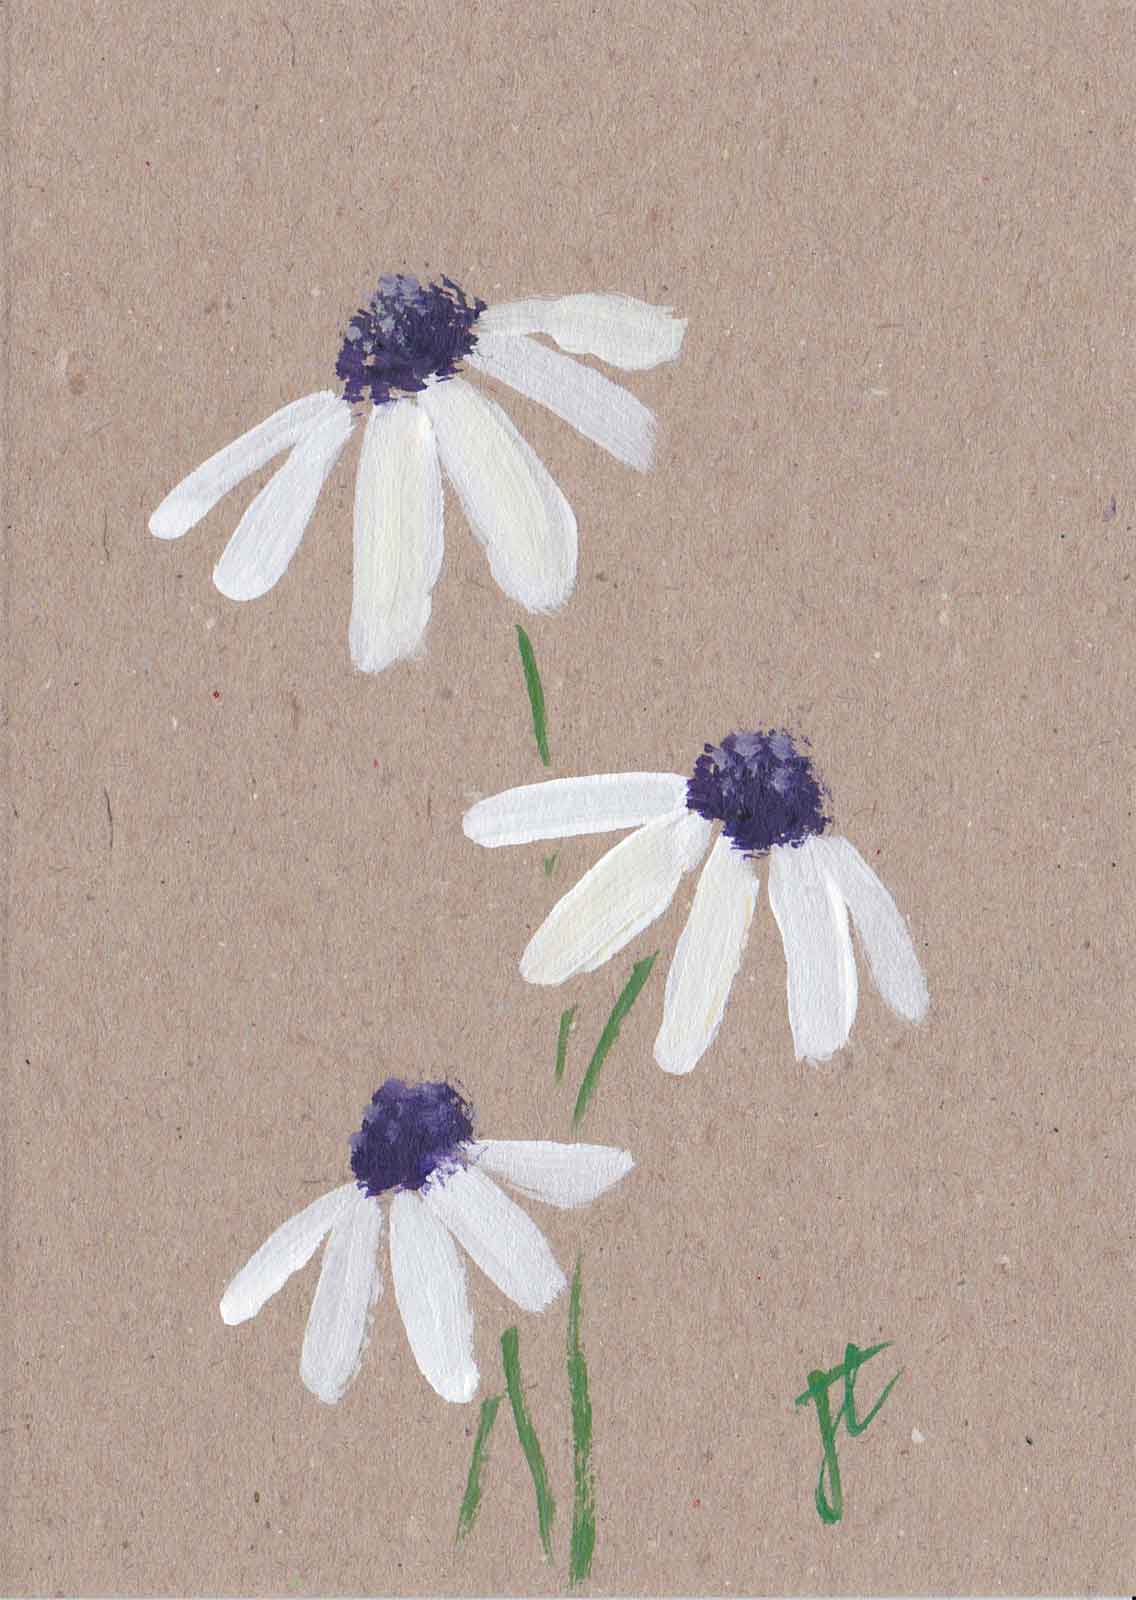 Hand-painted osteospermum daisies on recycled card stock